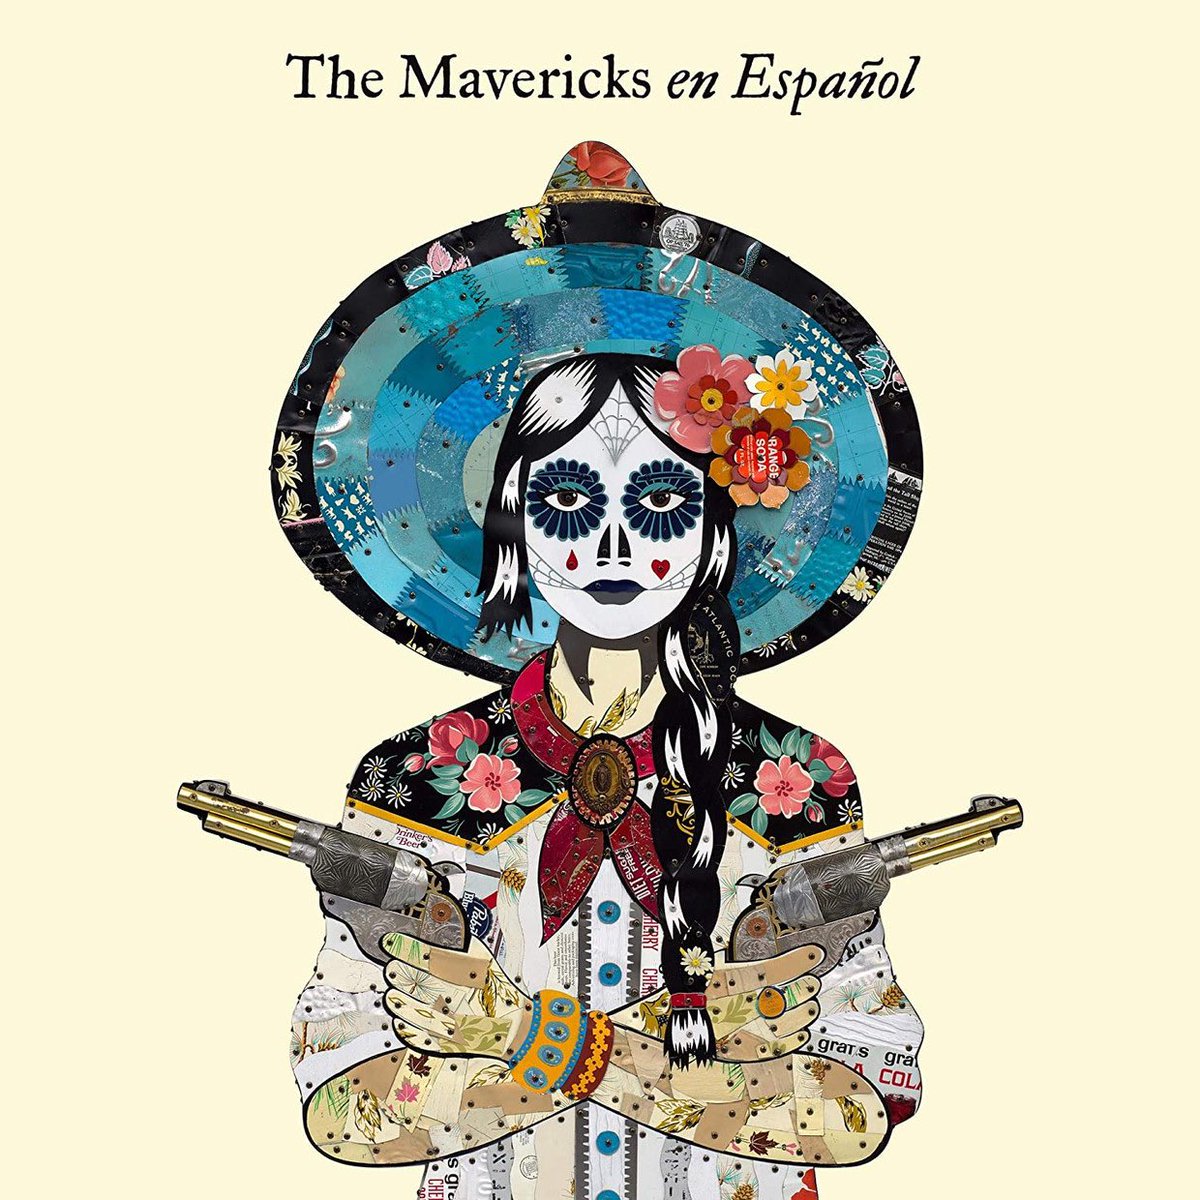 71. The Mavericks - En español (somehow over 30+ years, The Mavericks never made an all Spanish album. Now they have and it’s incredible. Trad, country, rockers, folk, it’s all there)